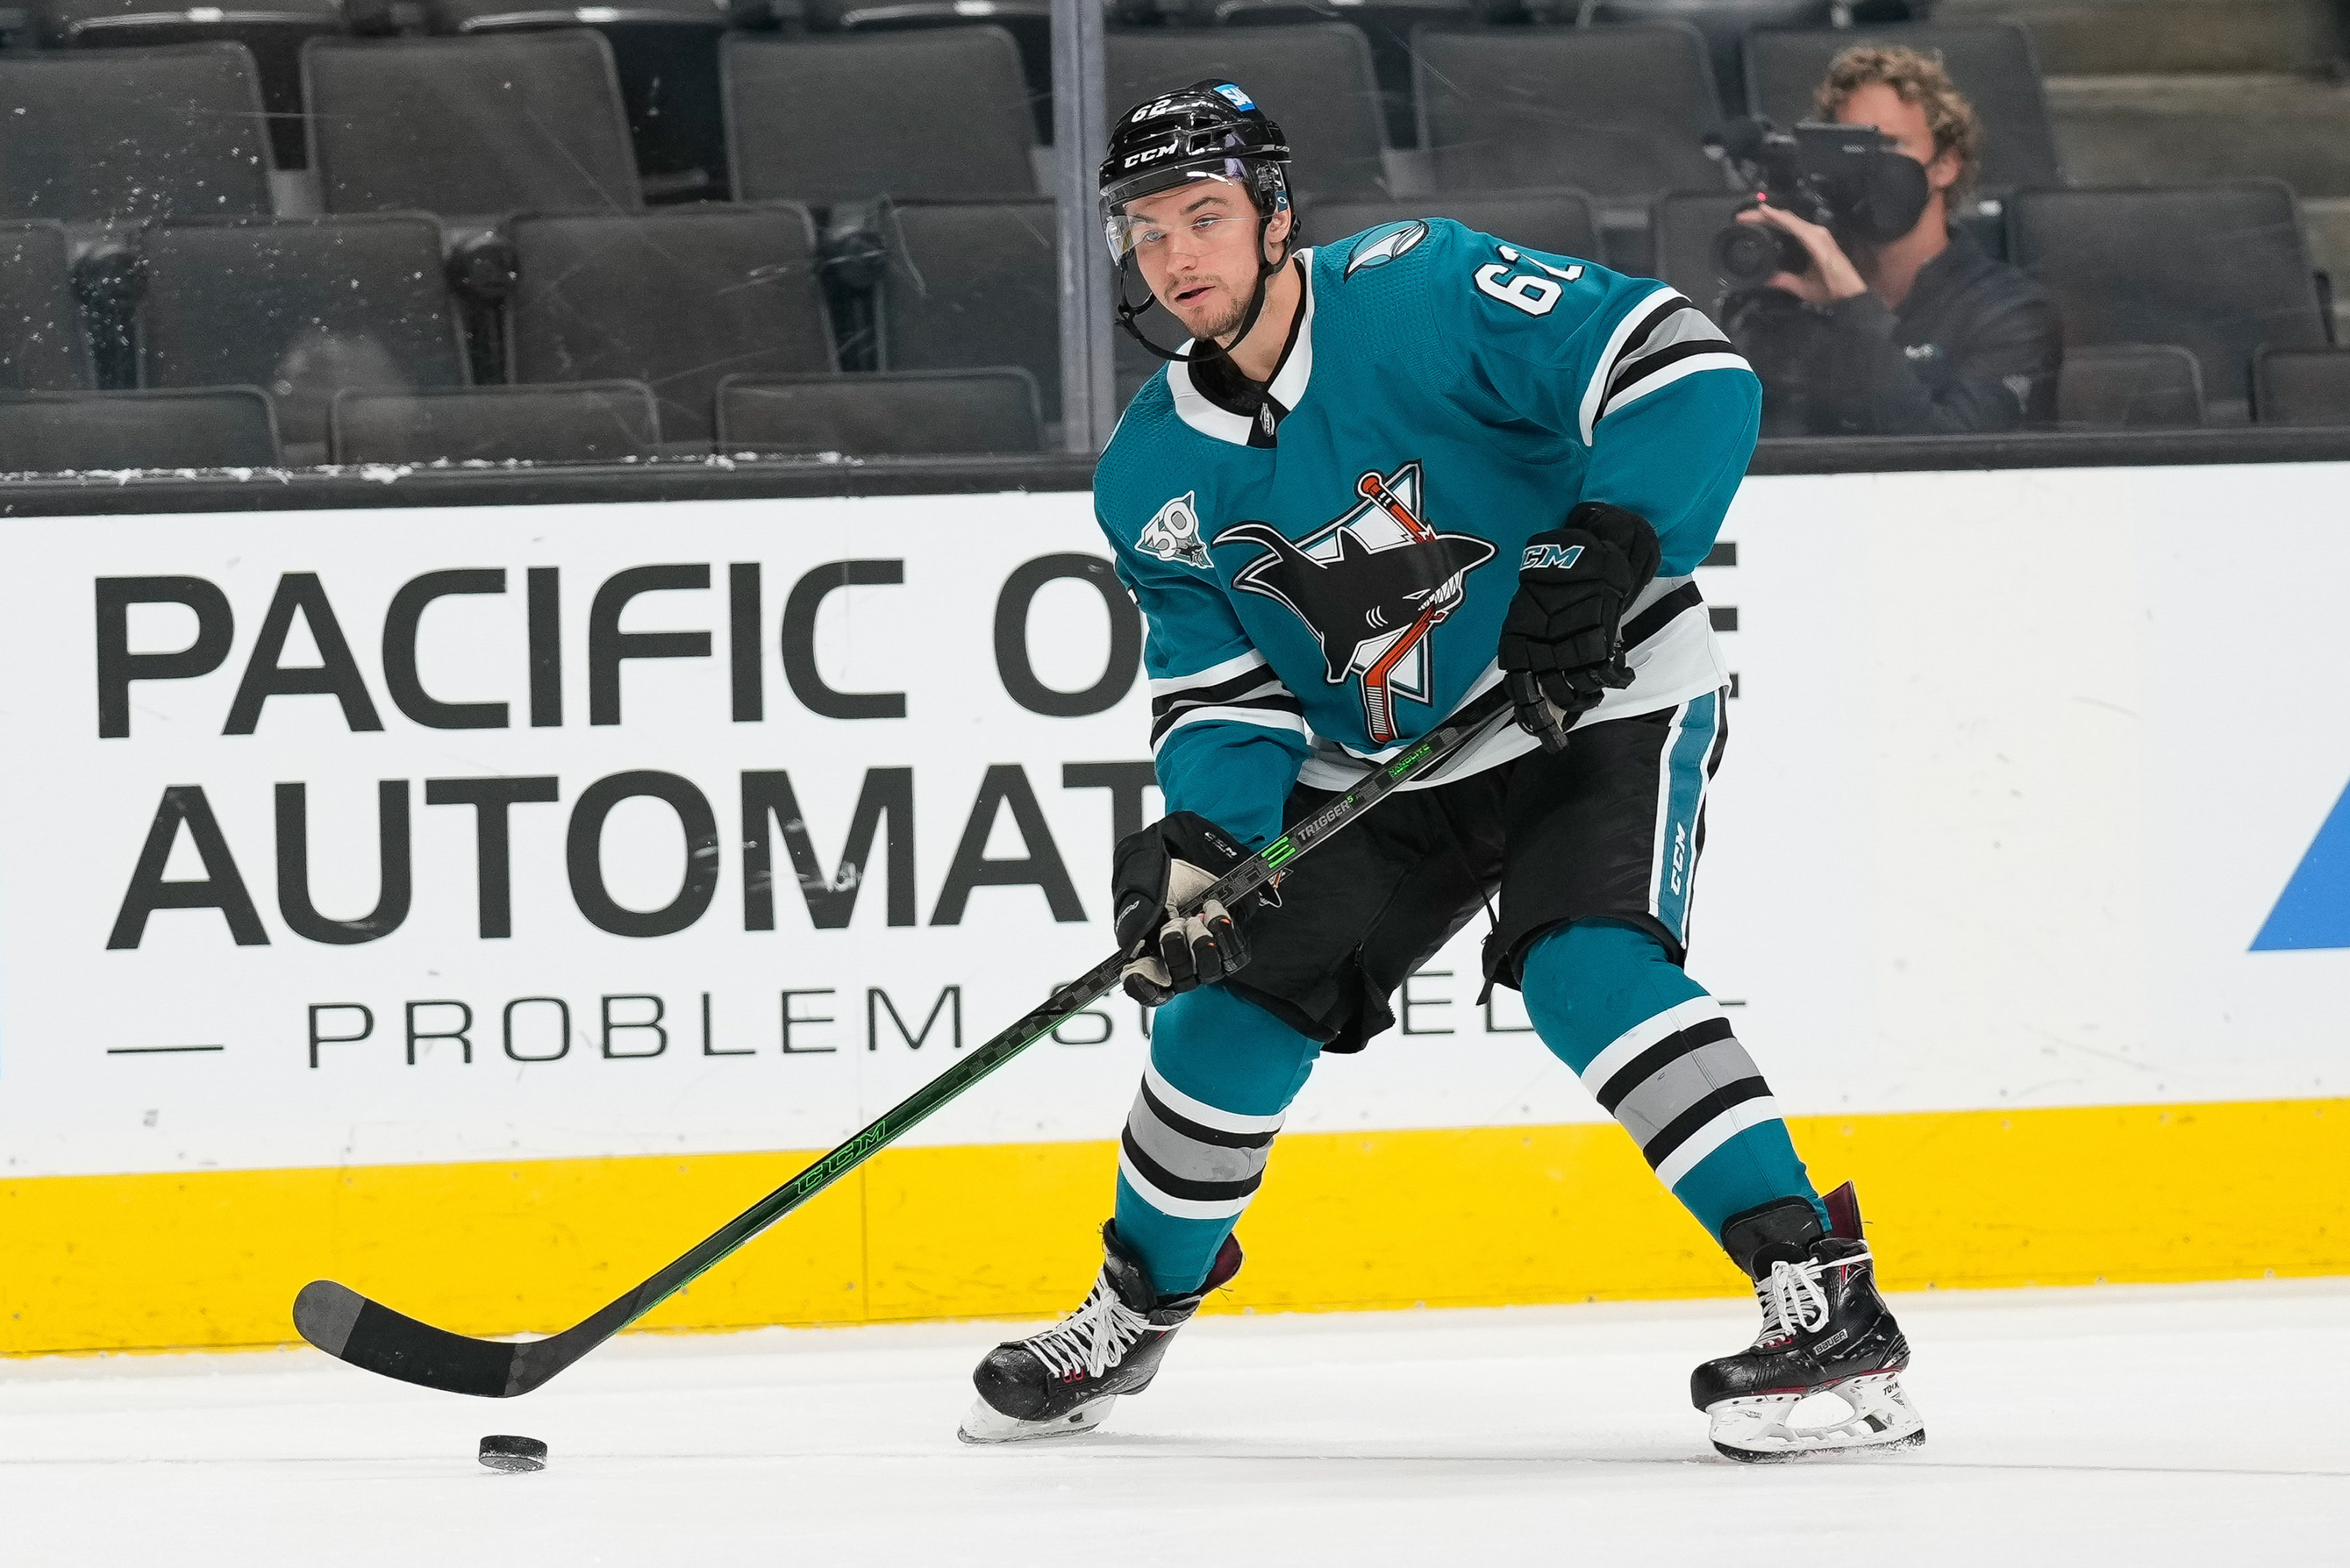 Sharks re-sign Kevin Labanc to 1-year, $1 million deal